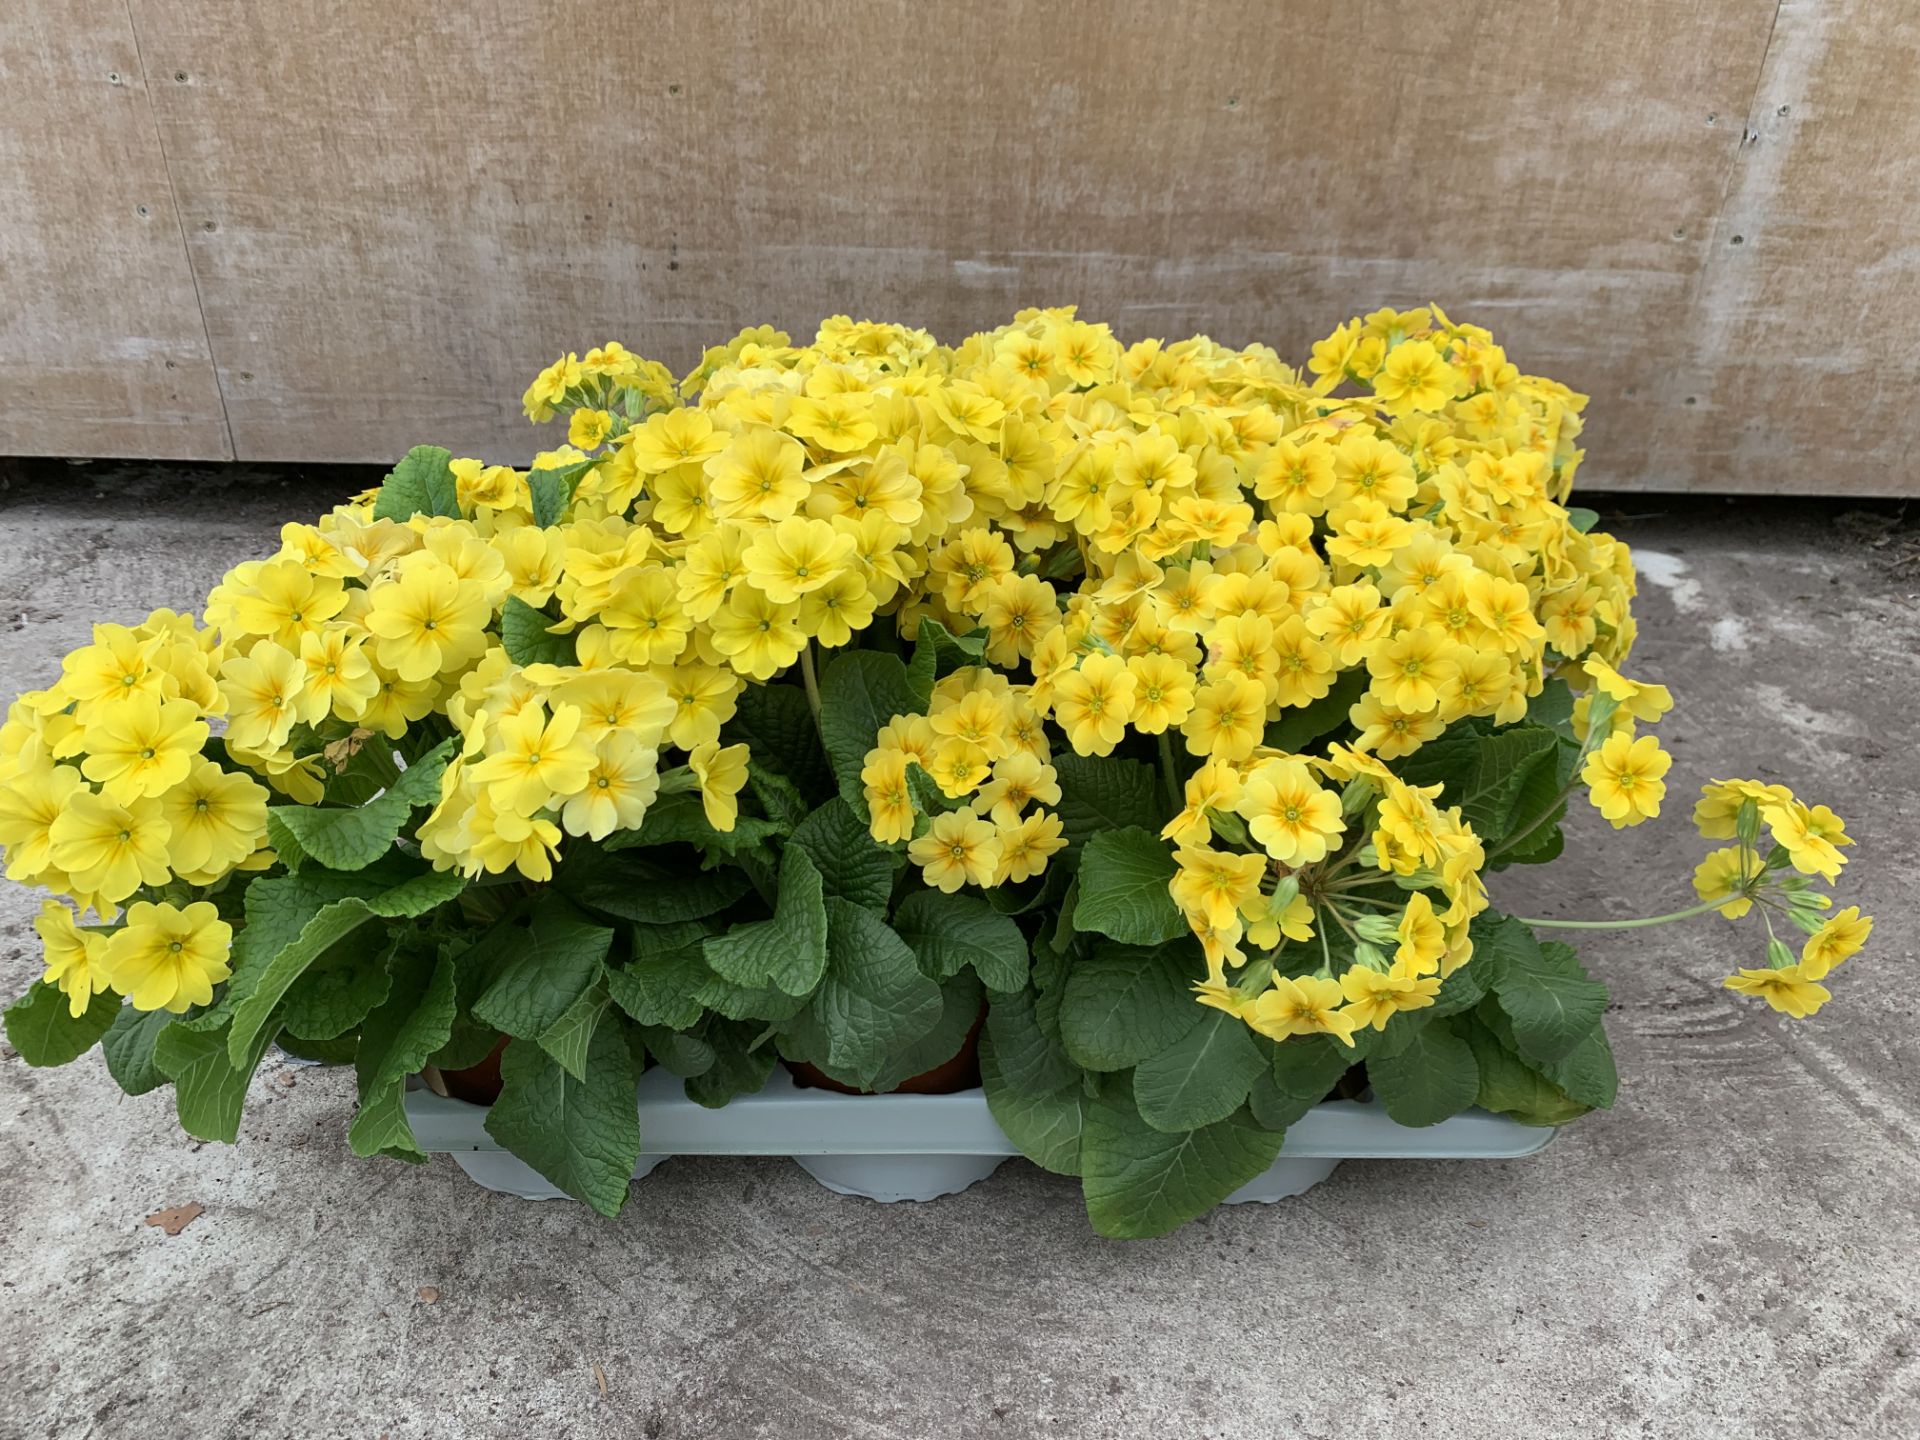 SIX GOLDEN NUGGET SCENTED YELLOW POLYANTHUS PLUS VAT TO BE SOLD FOR THE SIX - Image 3 of 4